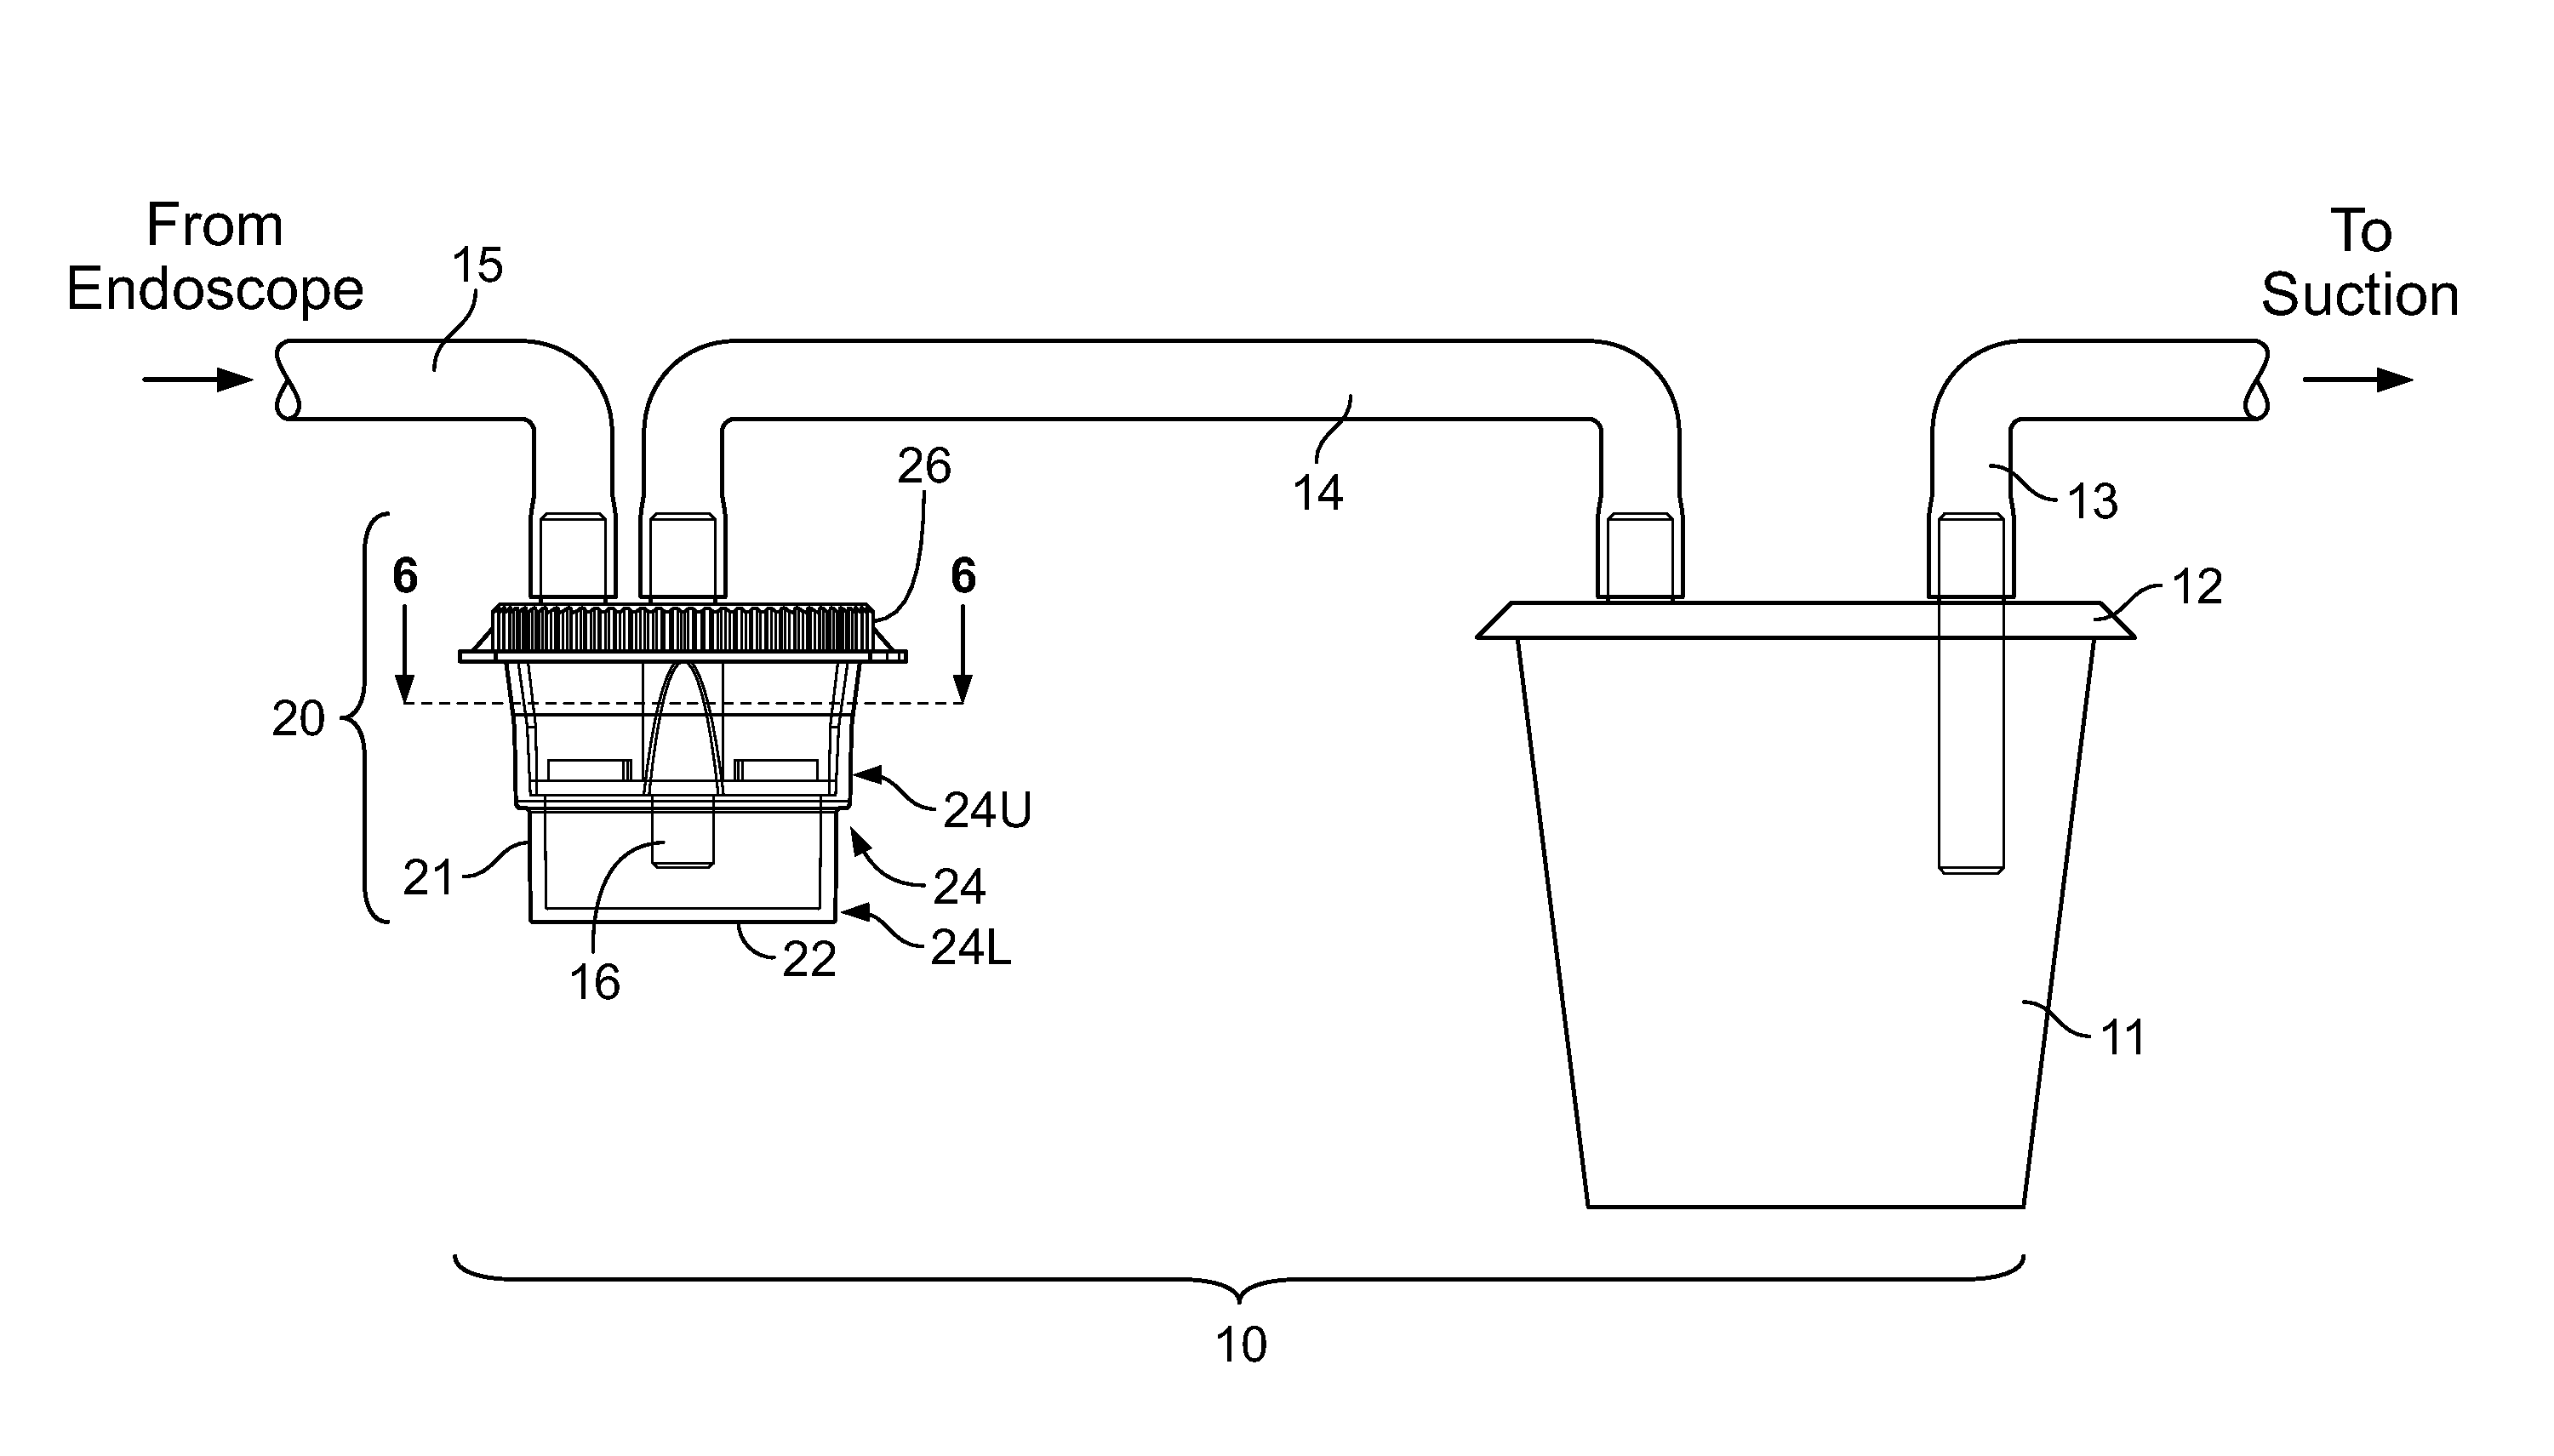 Tissue collection and separation device